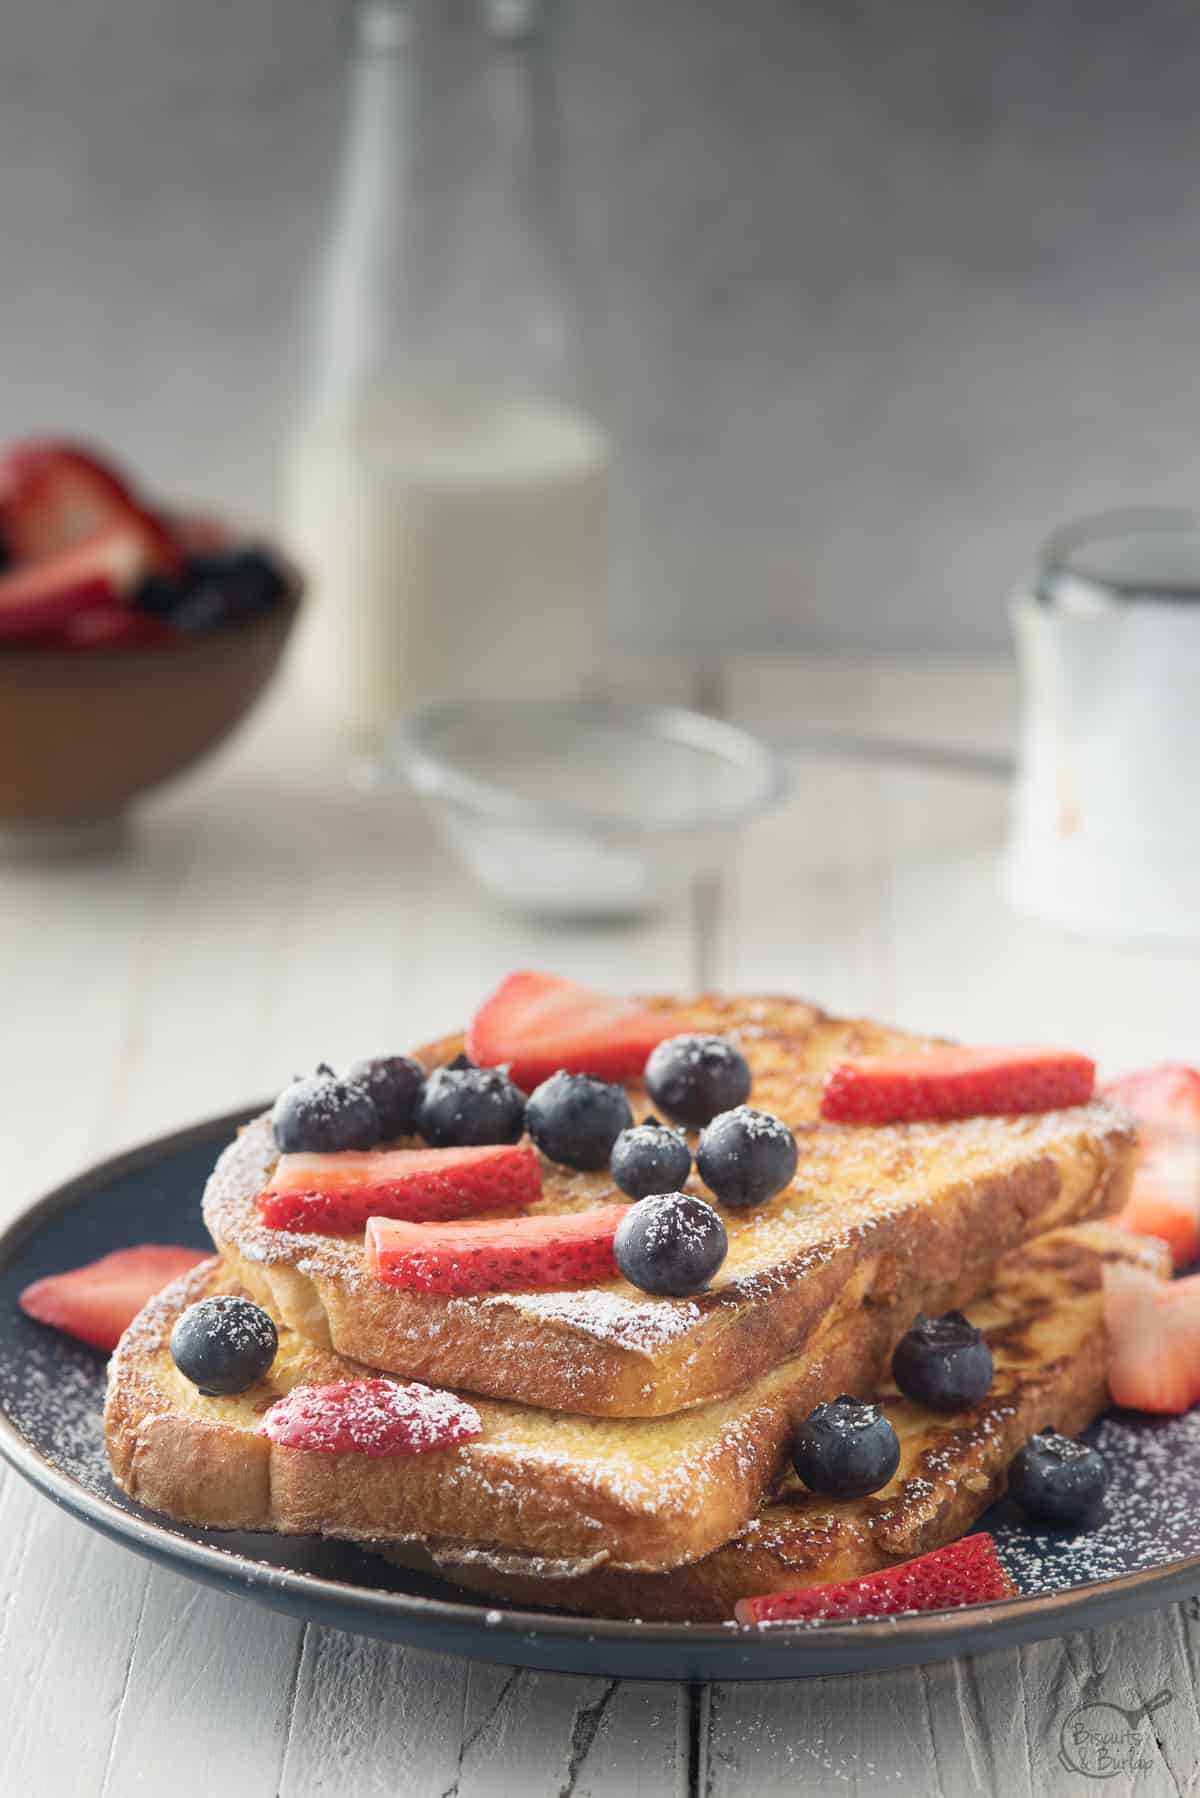 french toast made from sourdough with berries, milk & syrup behind.